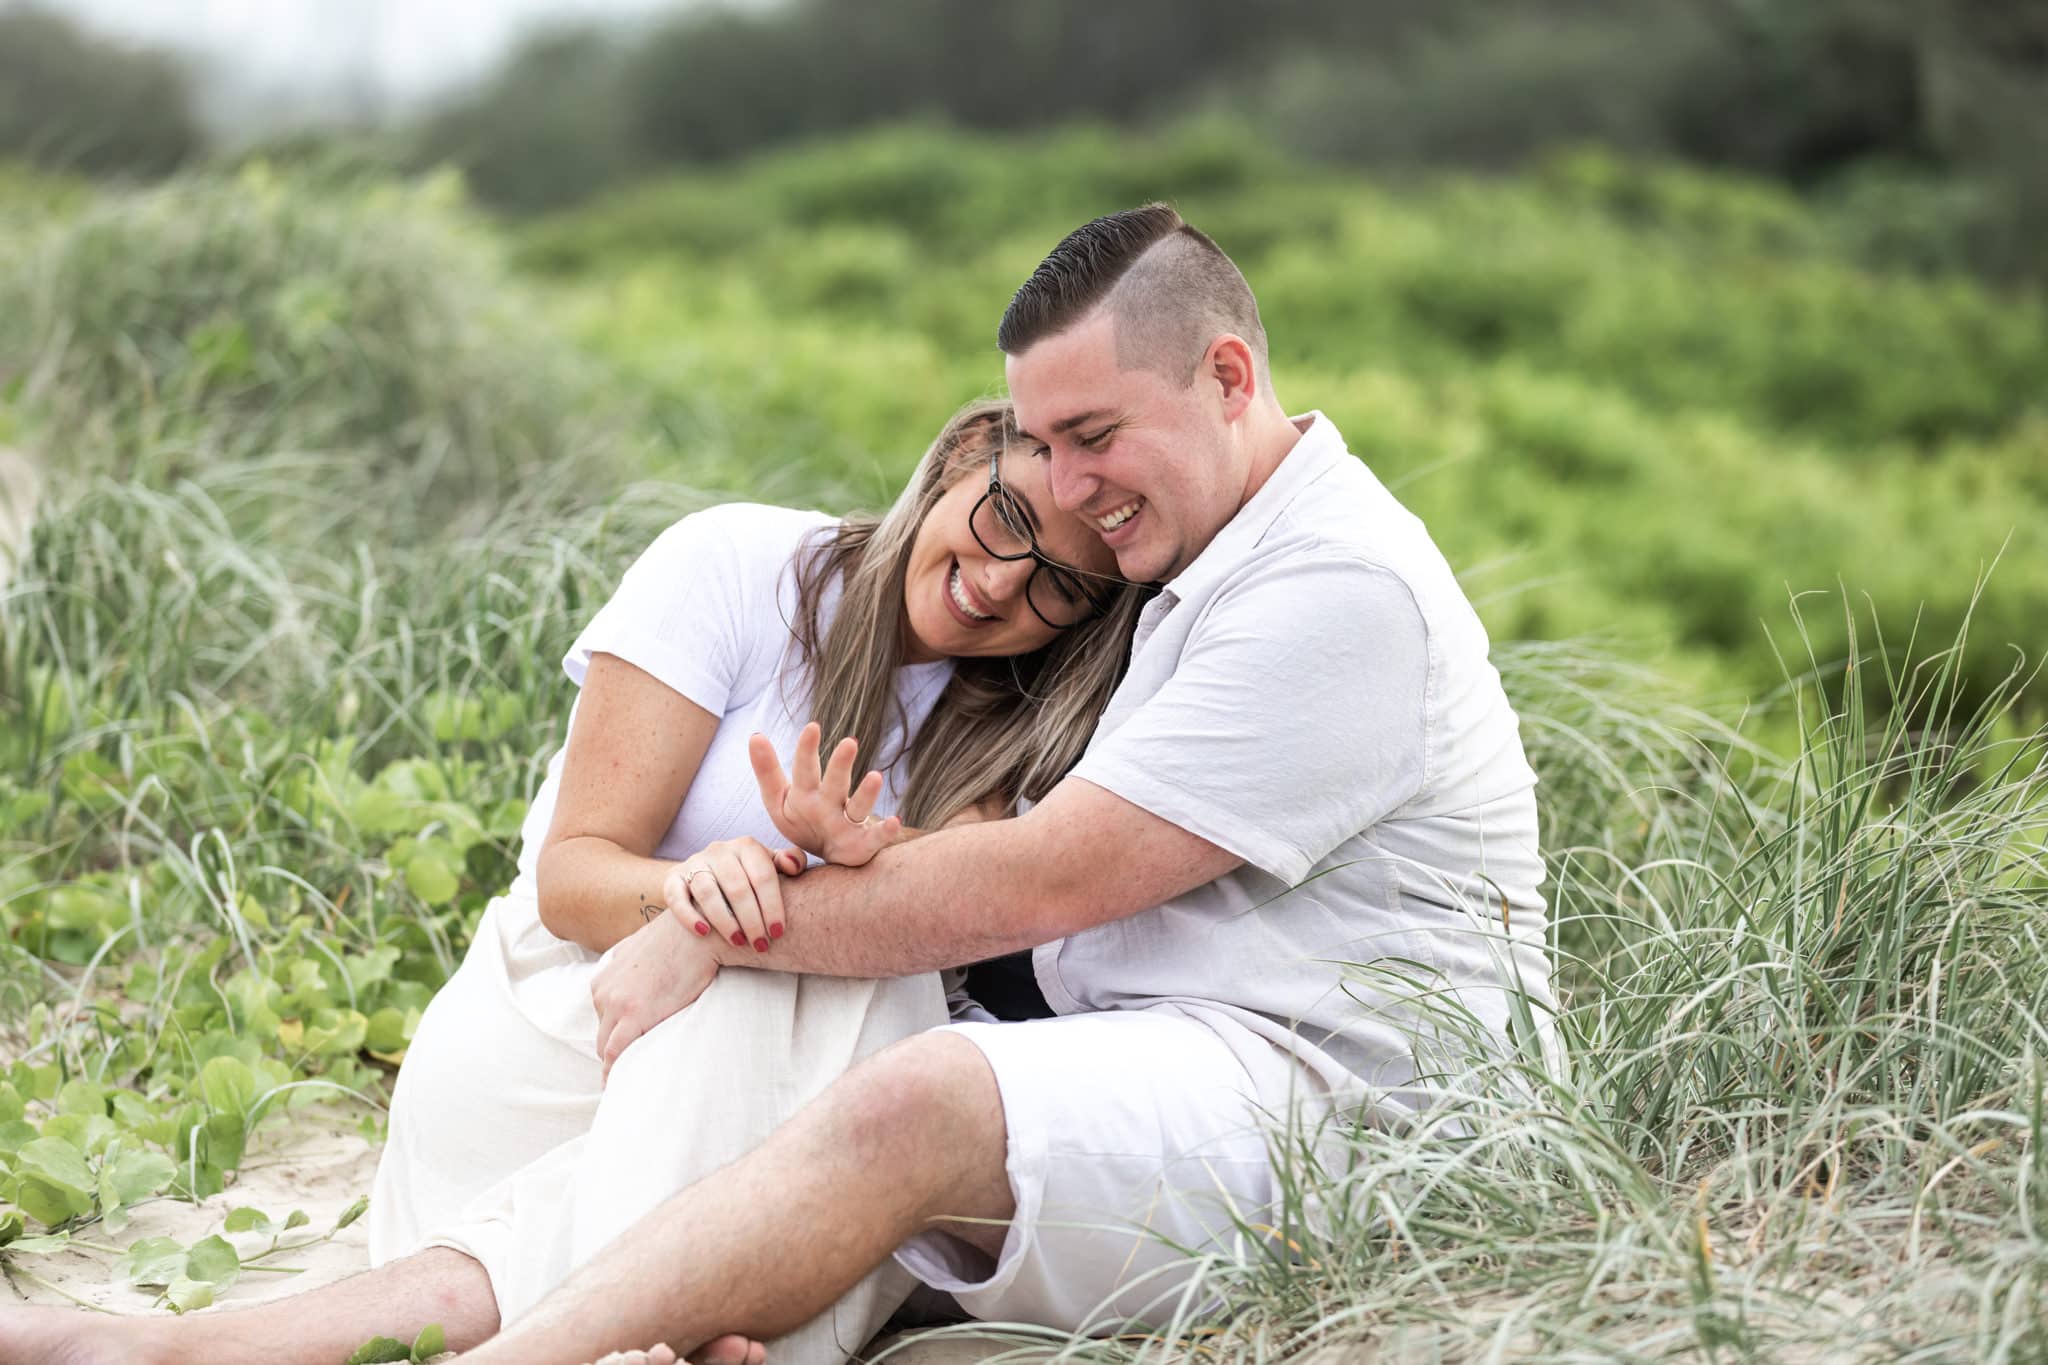 Gold Coast beach engagement couples photo shoot, by Mooi Photography.